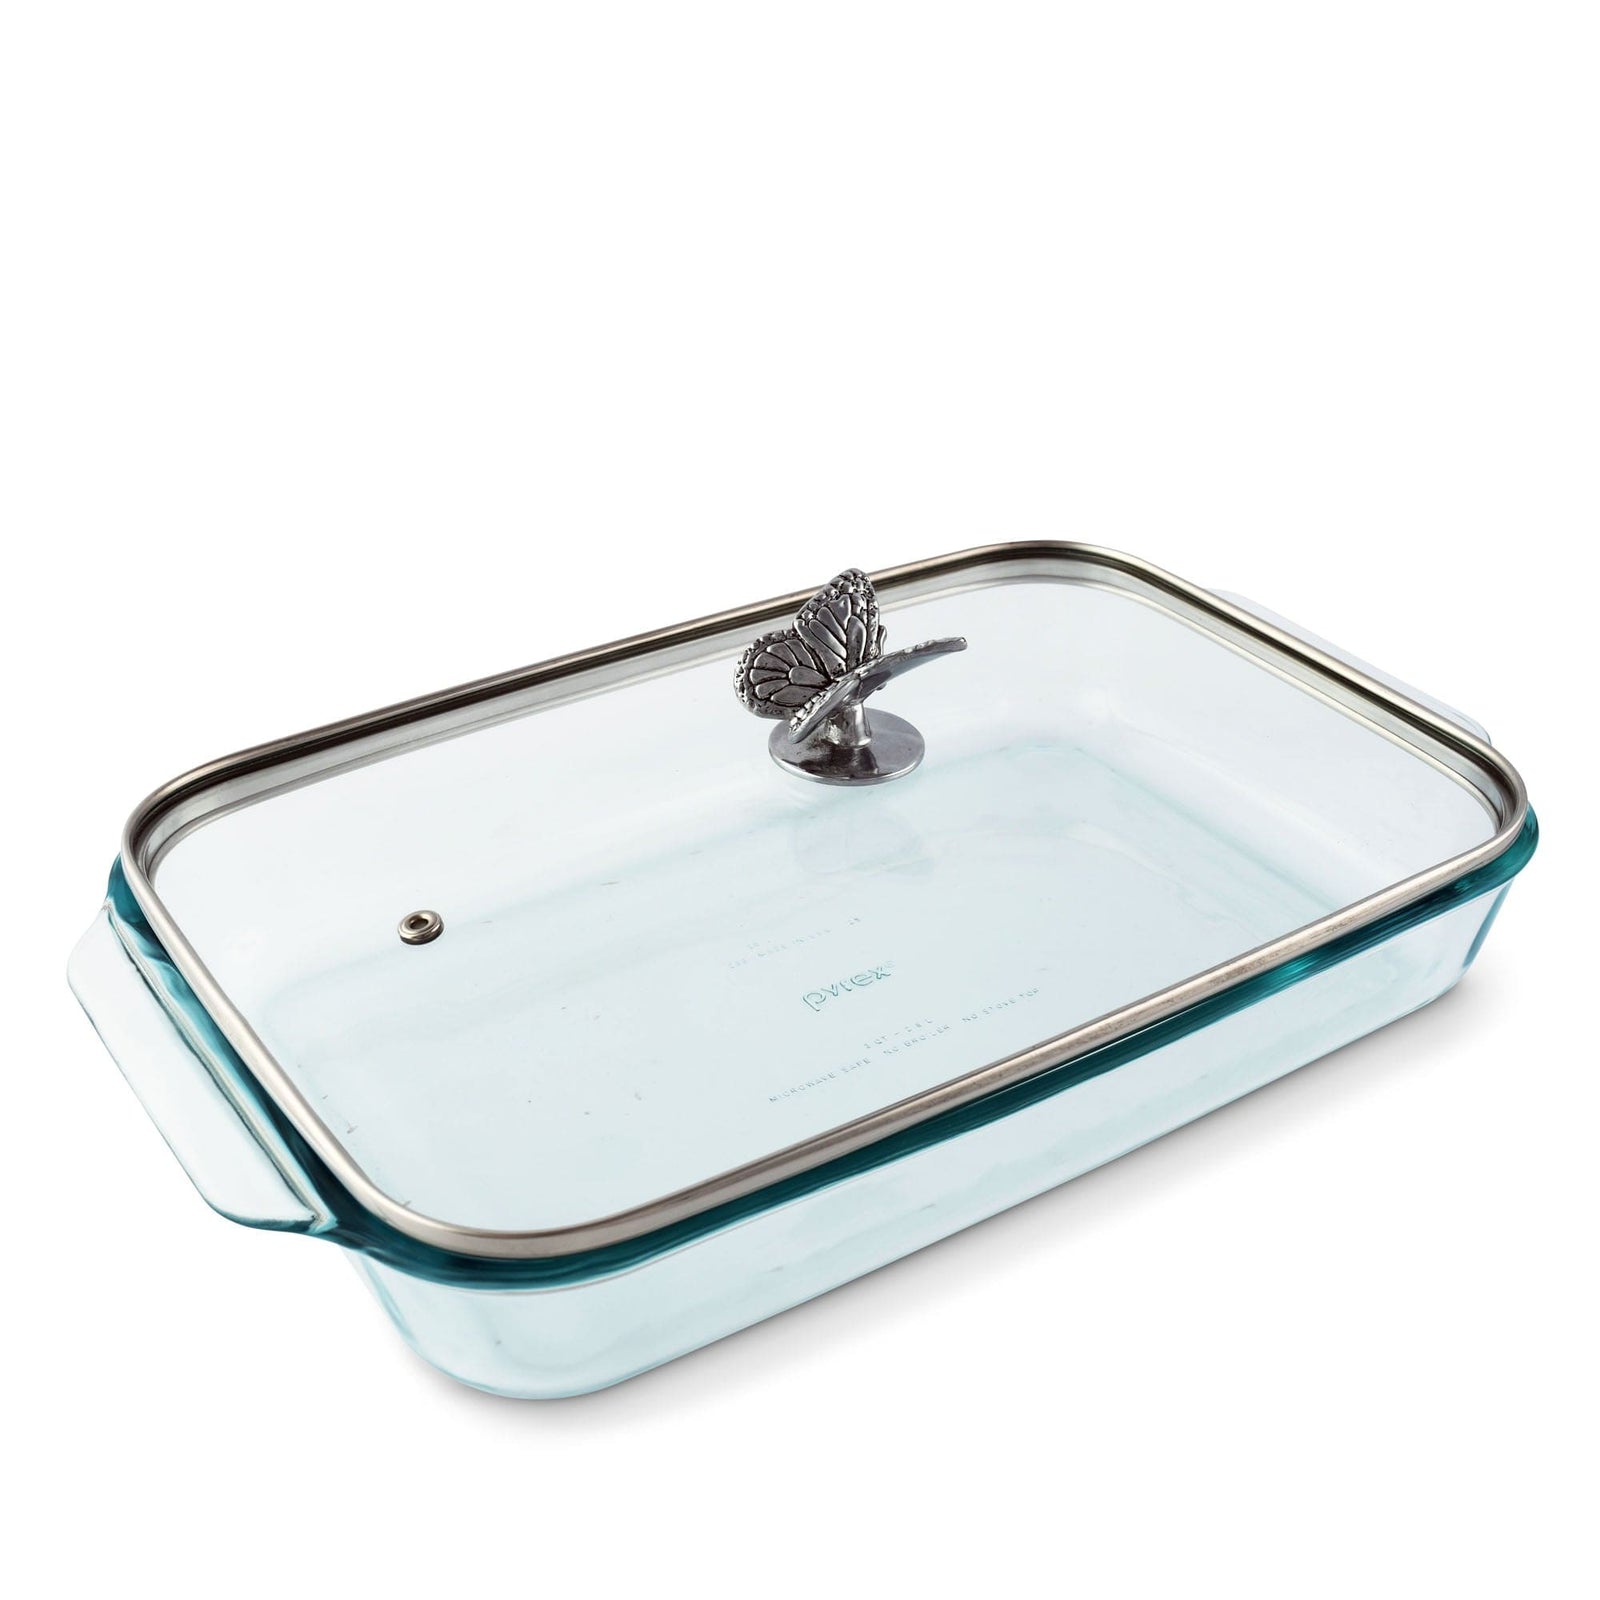 https://cdn.shopify.com/s/files/1/2081/3285/products/arthur-court-butterfly-butterfly-lid-with-pyrex-3-quart-baking-dish-812m12-31866362003571_1600x.jpg?v=1678114173